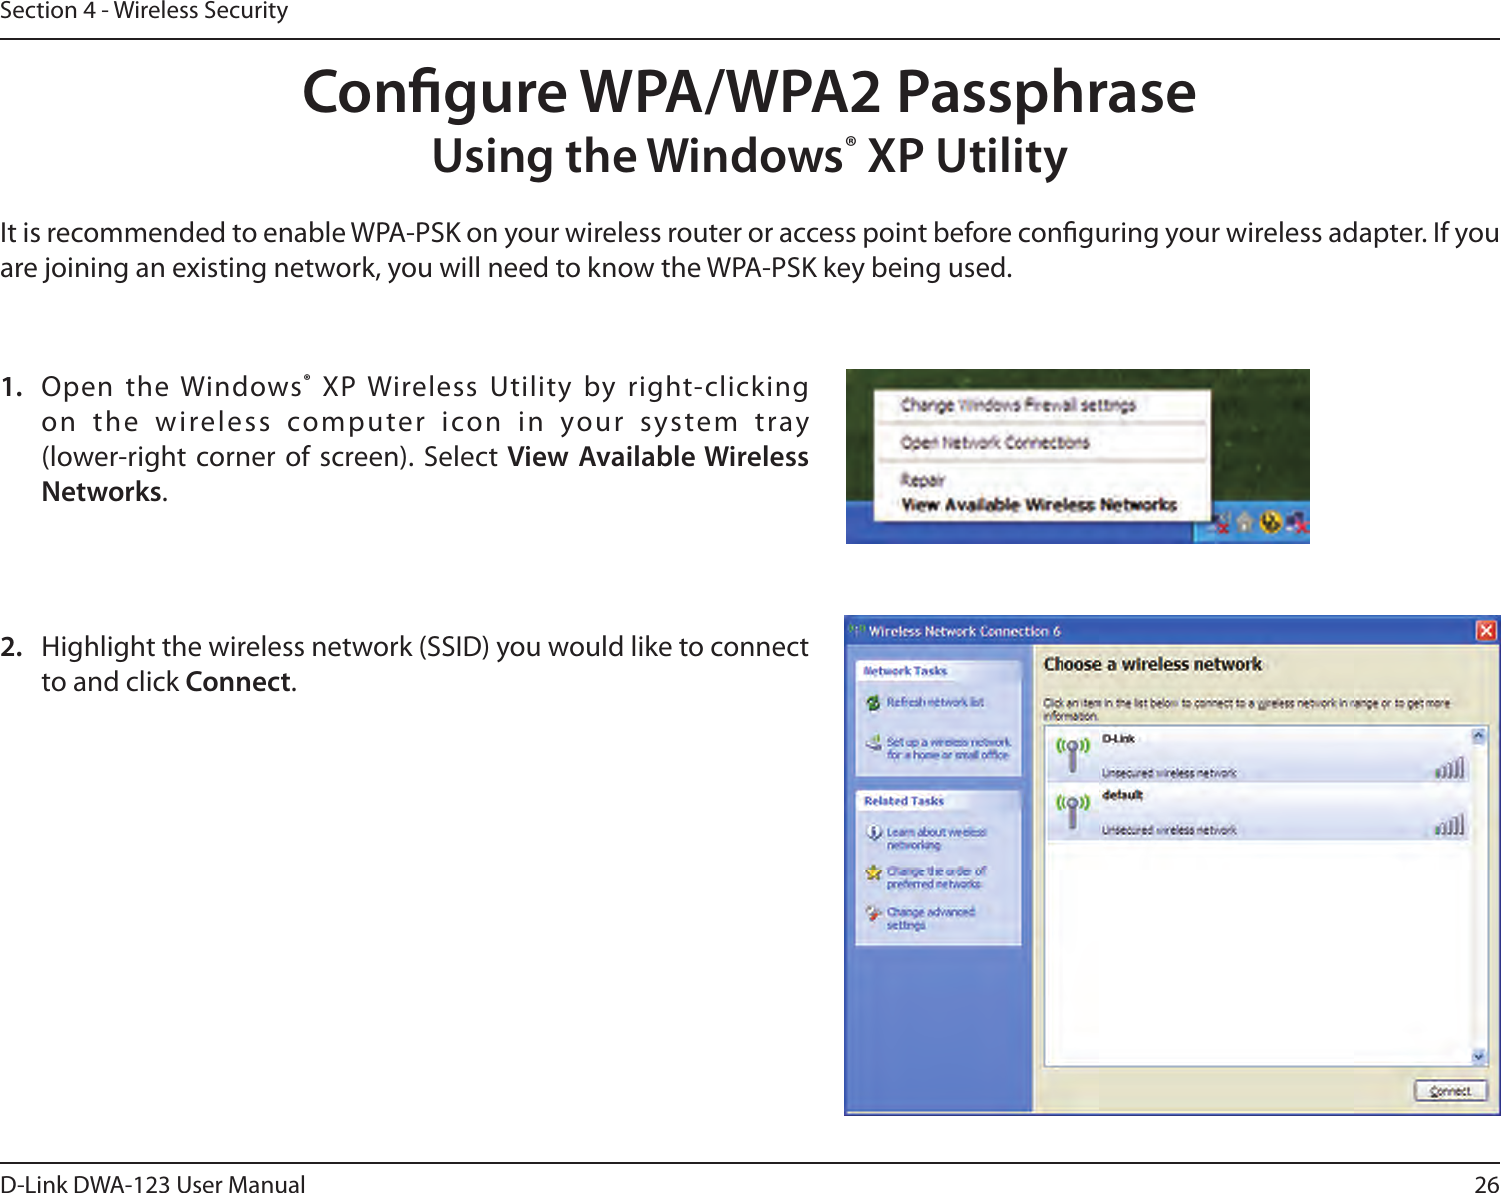 26D-Link DWA-123 User ManualSection 4 - Wireless SecurityCongure WPA/WPA2 PassphraseUsing the Windows® XP UtilityIt is recommended to enable WPA-PSK on your wireless router or access point before conguring your wireless adapter. If you are joining an existing network, you will need to know the WPA-PSK key being used.2.  Highlight the wireless network (SSID) you would like to connect to and click Connect.1.  Open the Windows® XP Wireless  Utility by right-clicking on  the  wireless  computer  icon  in  your  system  tray  (lower-right corner of  screen). Select View Available Wireless Networks. 